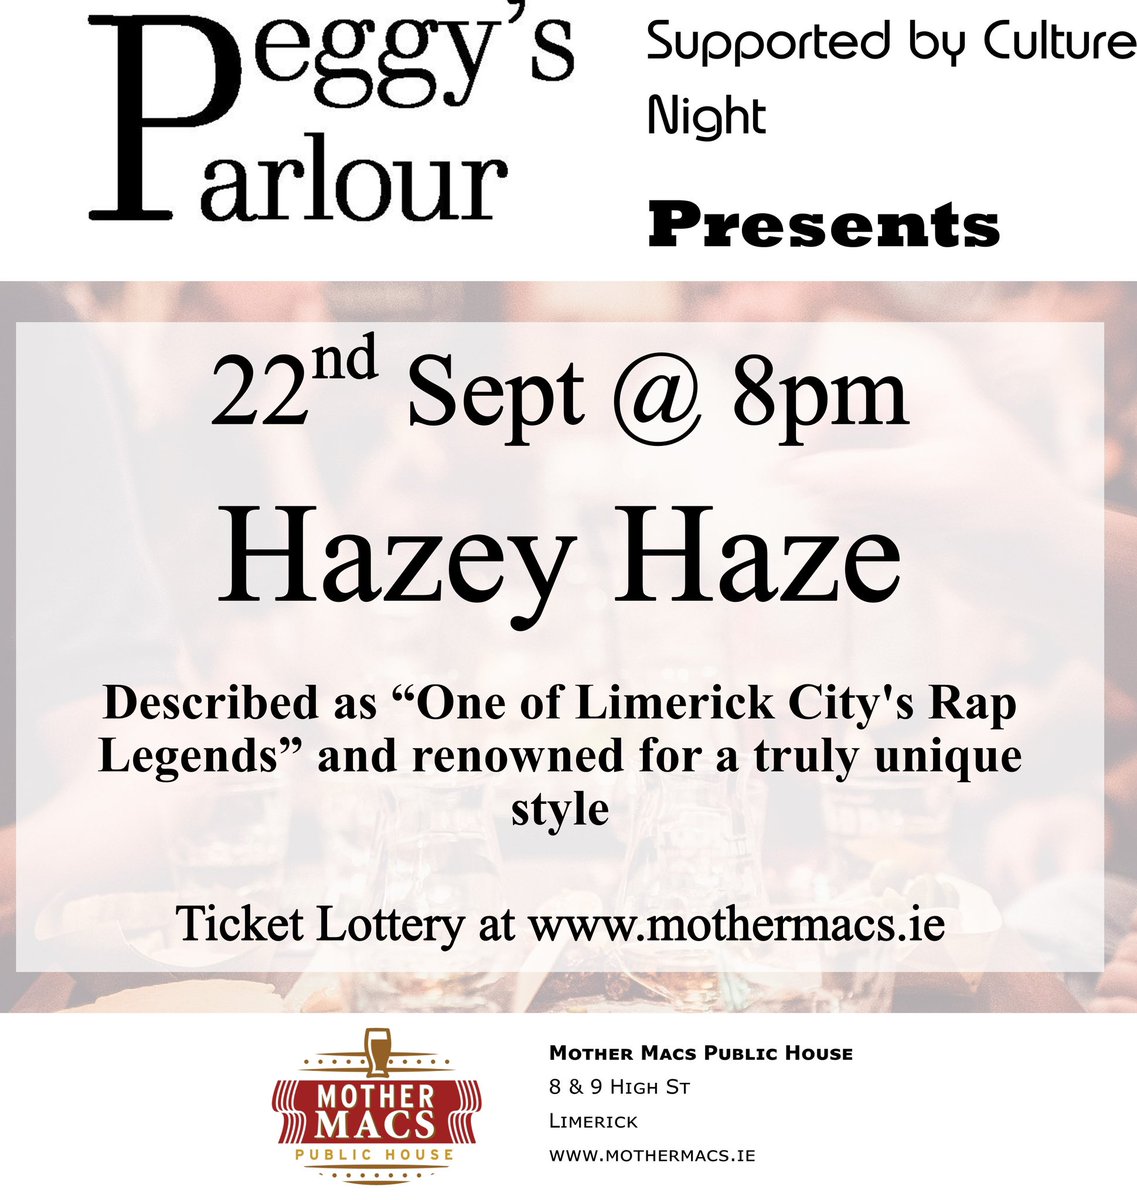 Lottery draw for An evening with Hazey Haze is now open - visit mothermacs.ie This is not a ticket, this is entry into the lottery for a ticket. Kindly supported by @CultureNight & @LimerickCouncil